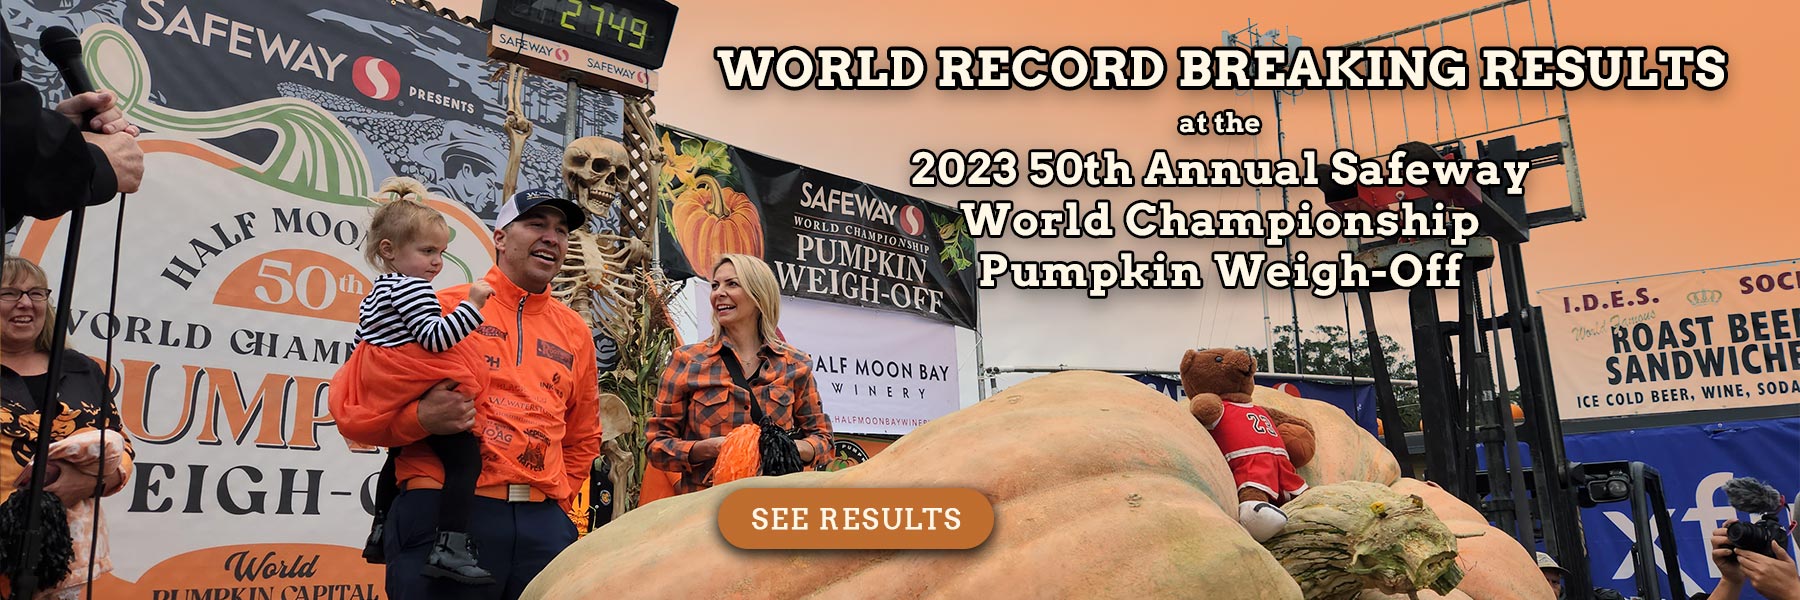 See the results of the 2023 Safeway World Championship Pumpkin Weigh-Off - click for details